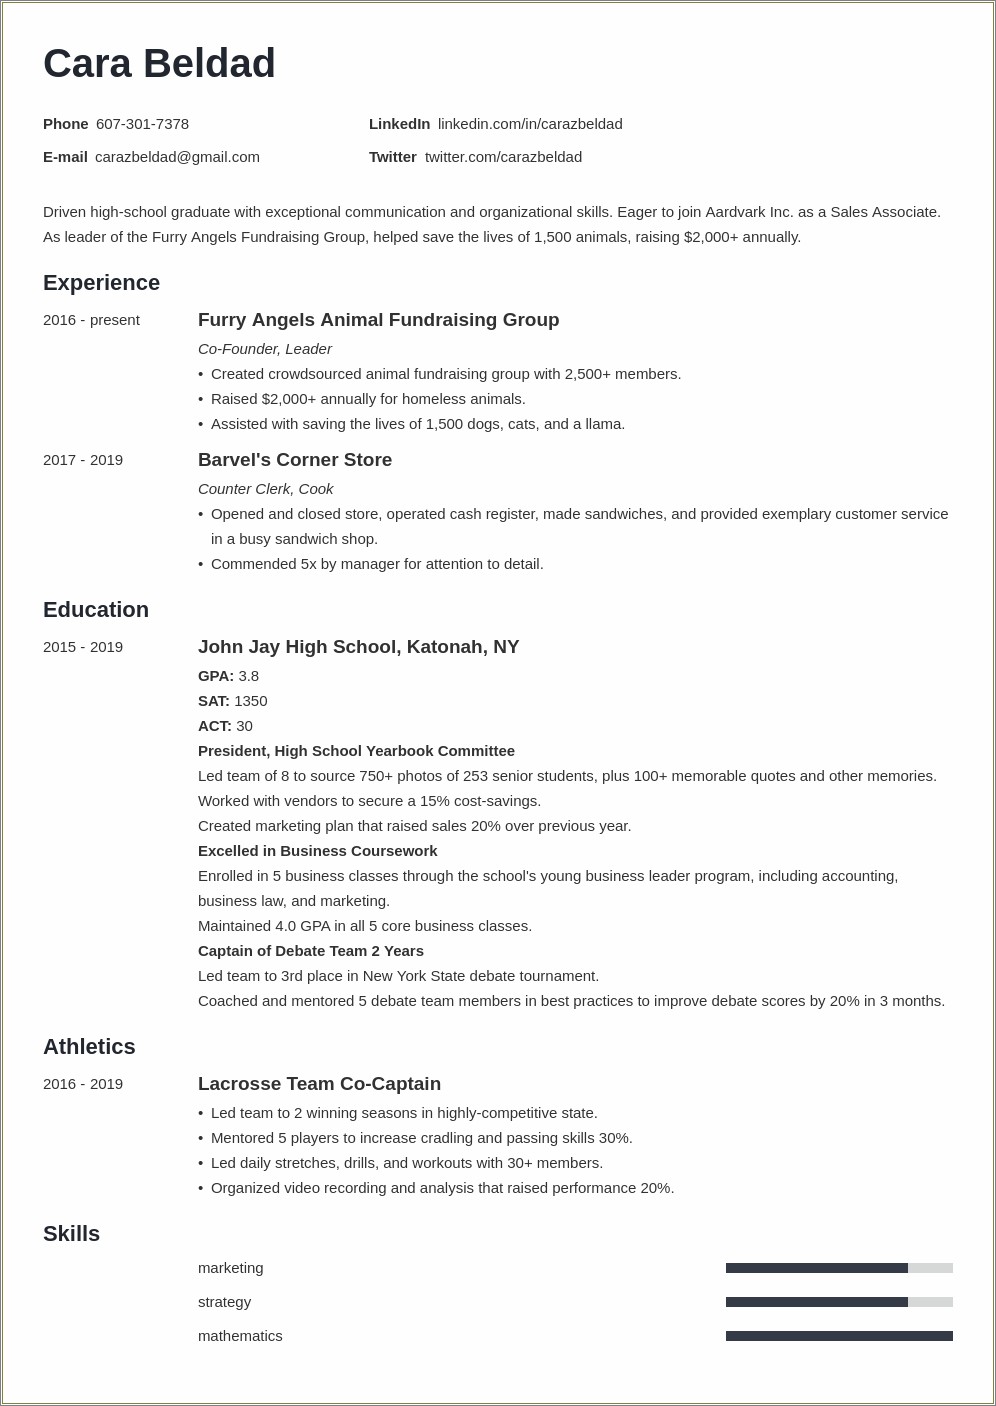 Resume Undergrad And Masters Included Same School